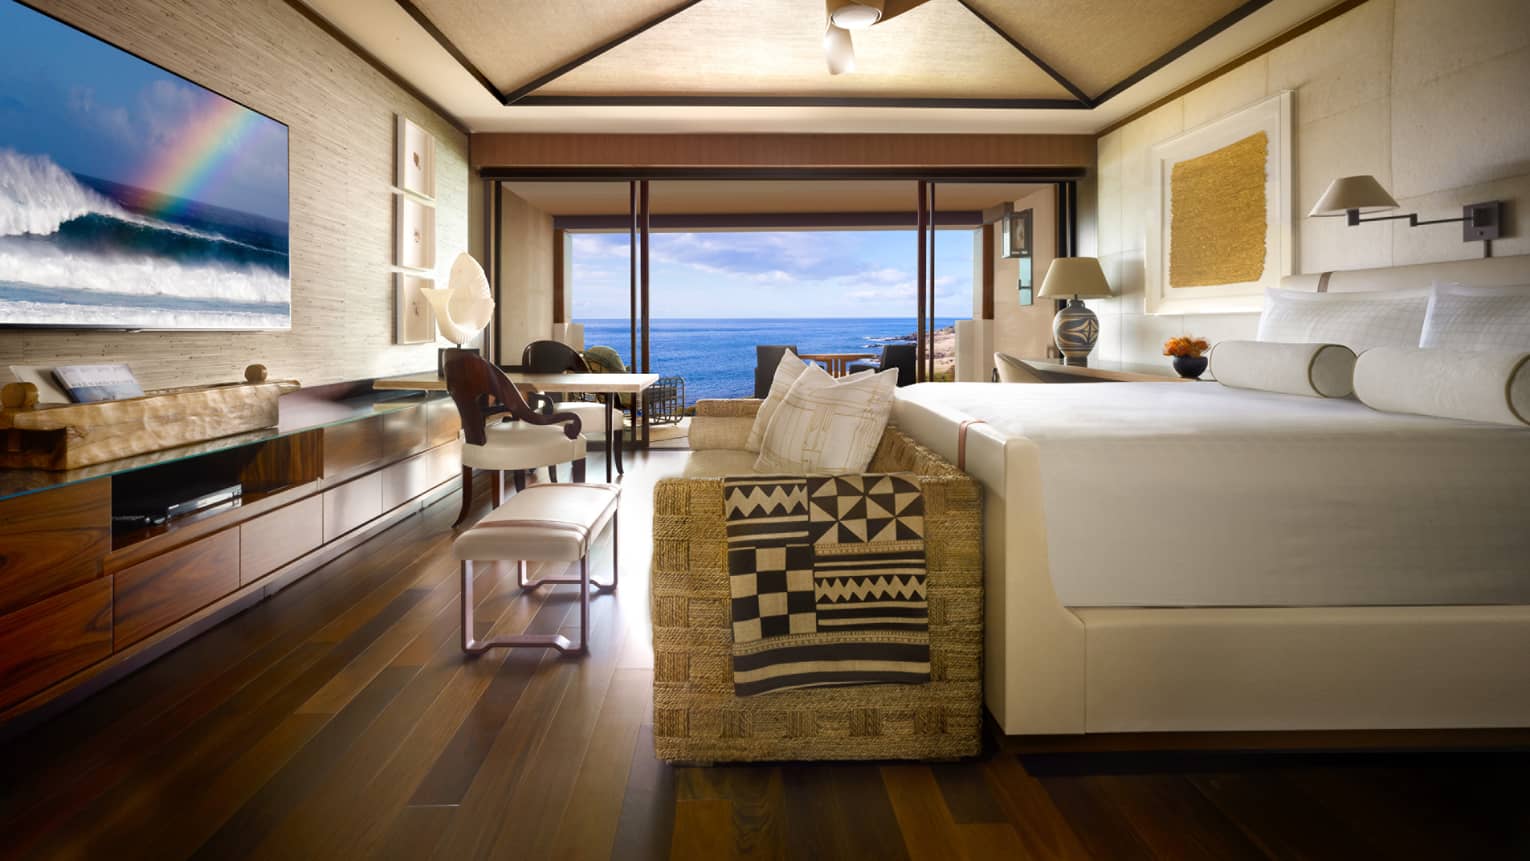 Oceanfront Room bed, small sofa and bench at foot, TV screen displaying ocean waves, rainbow